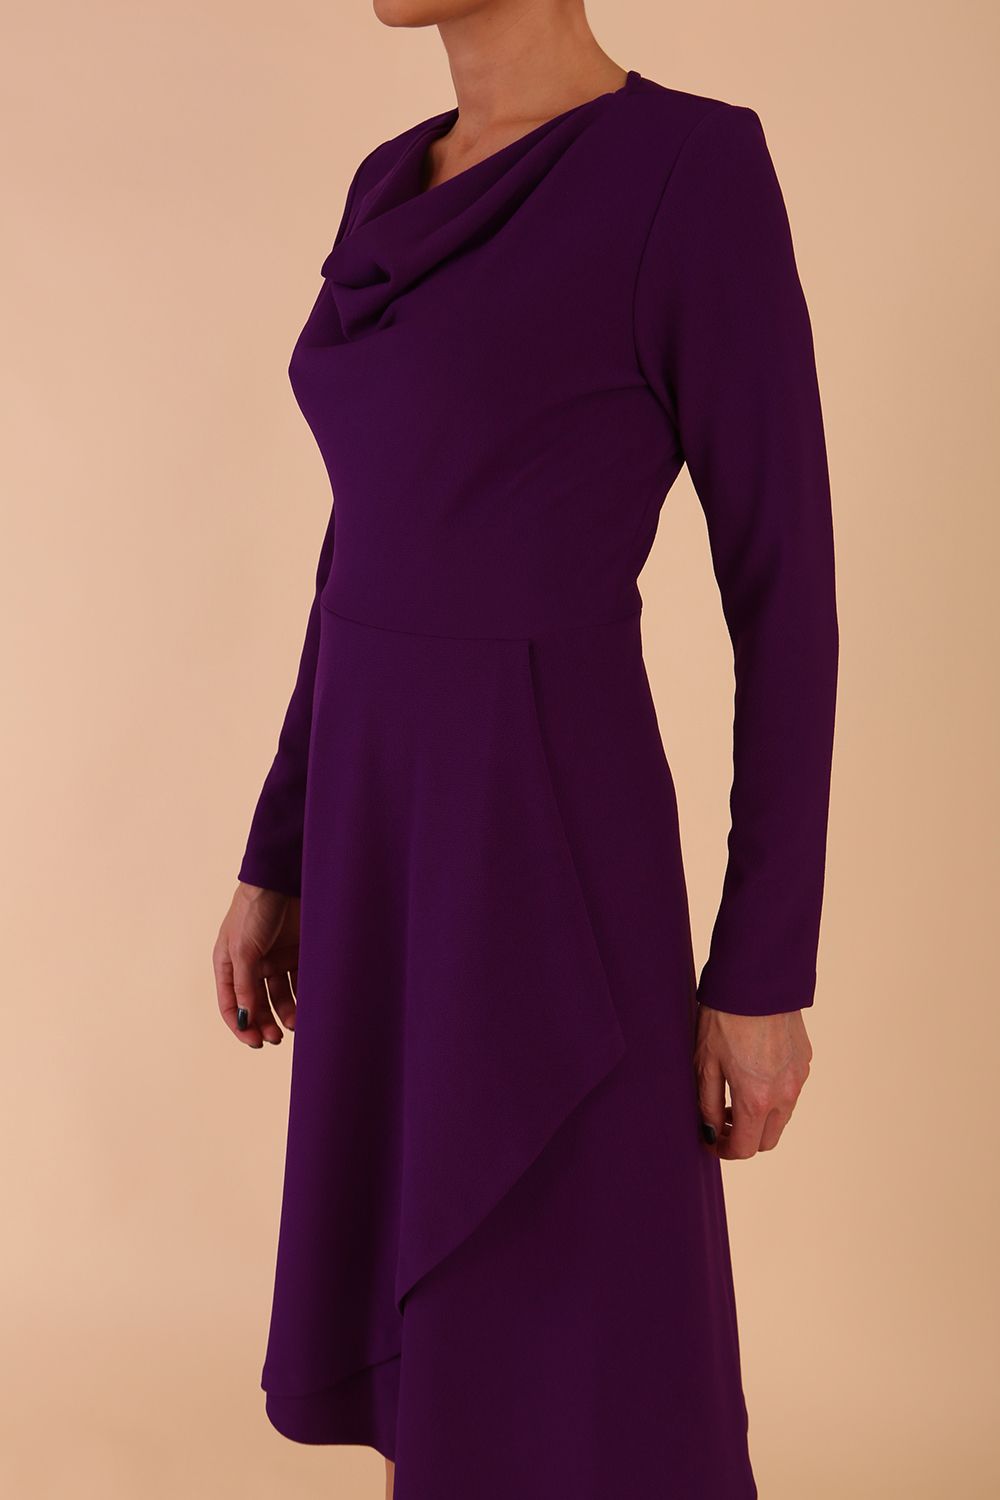 model is wearing diva catwalk moraig swing long sleeve dress with high cowl neckline and wrap skirt in deep purple front side detail